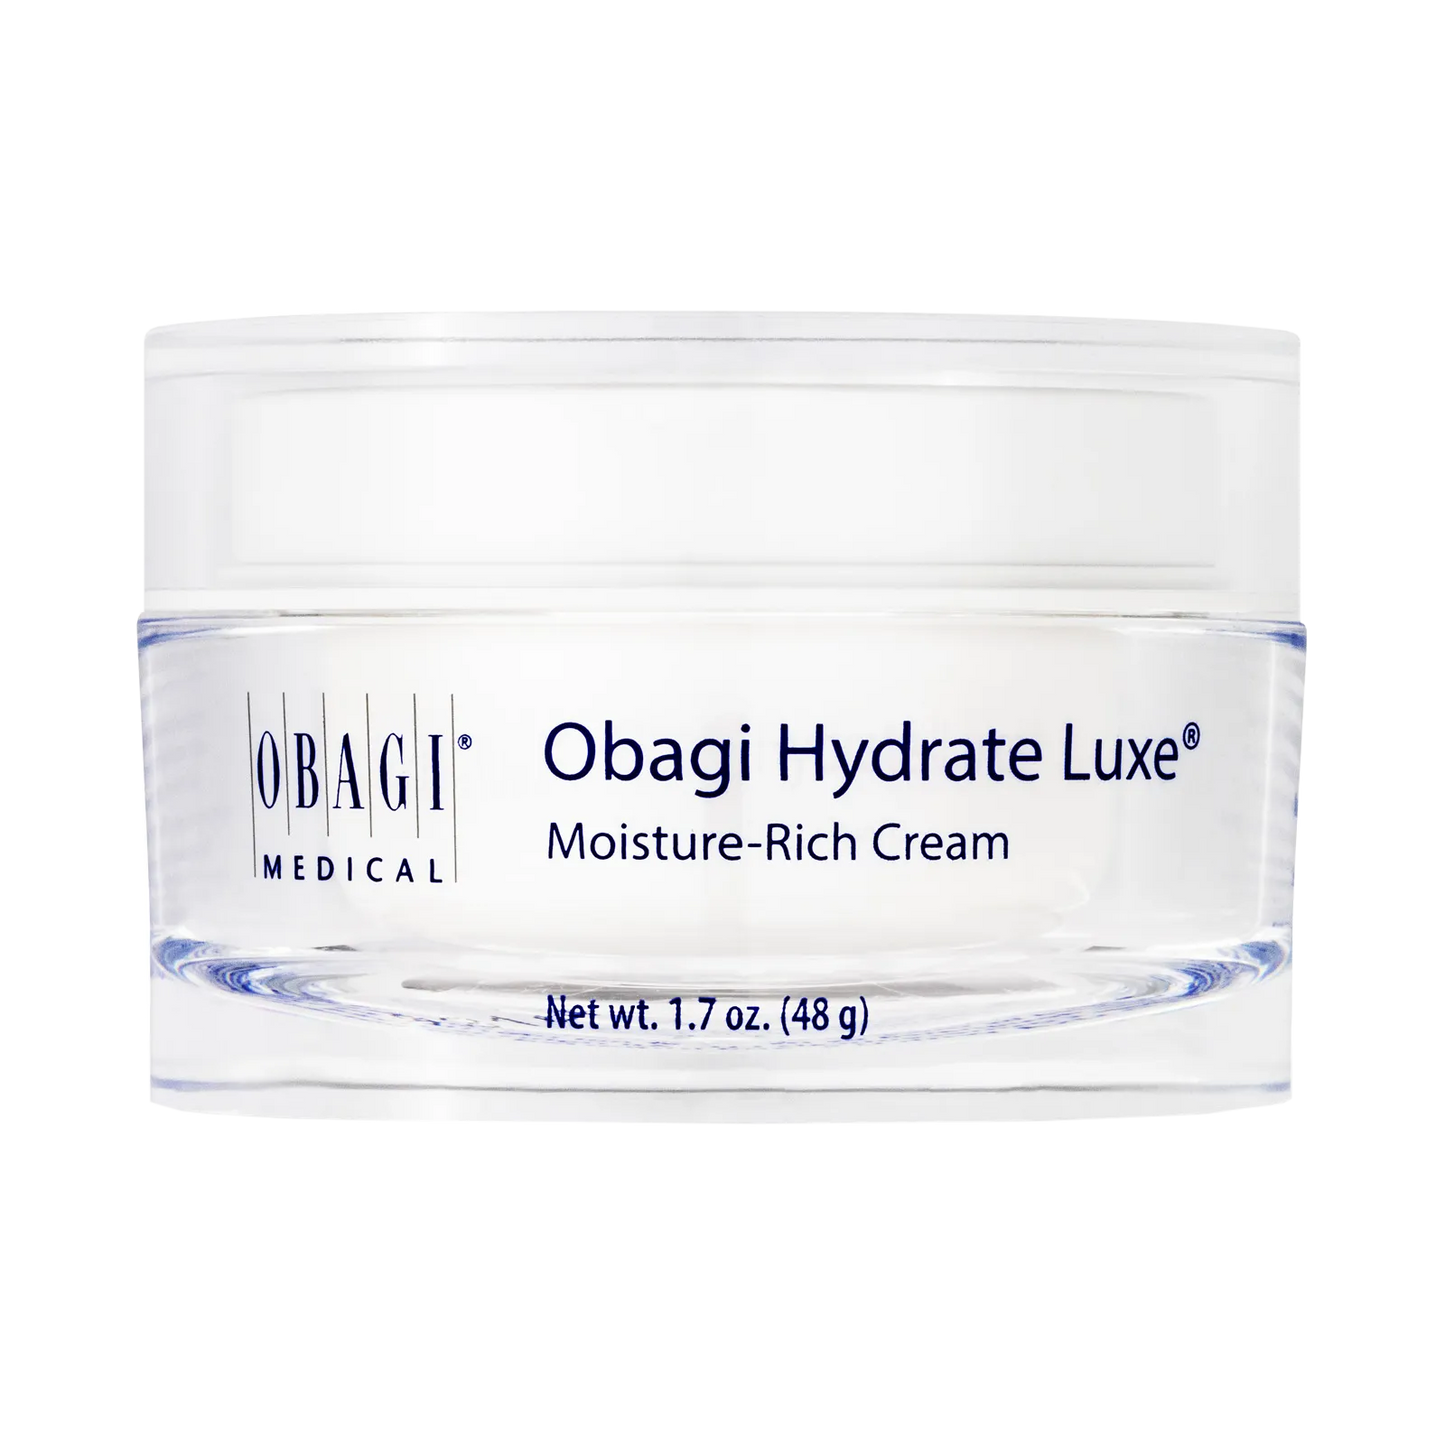 OBAGI HYDRATE LUXE 48G / 1.7 OZ.